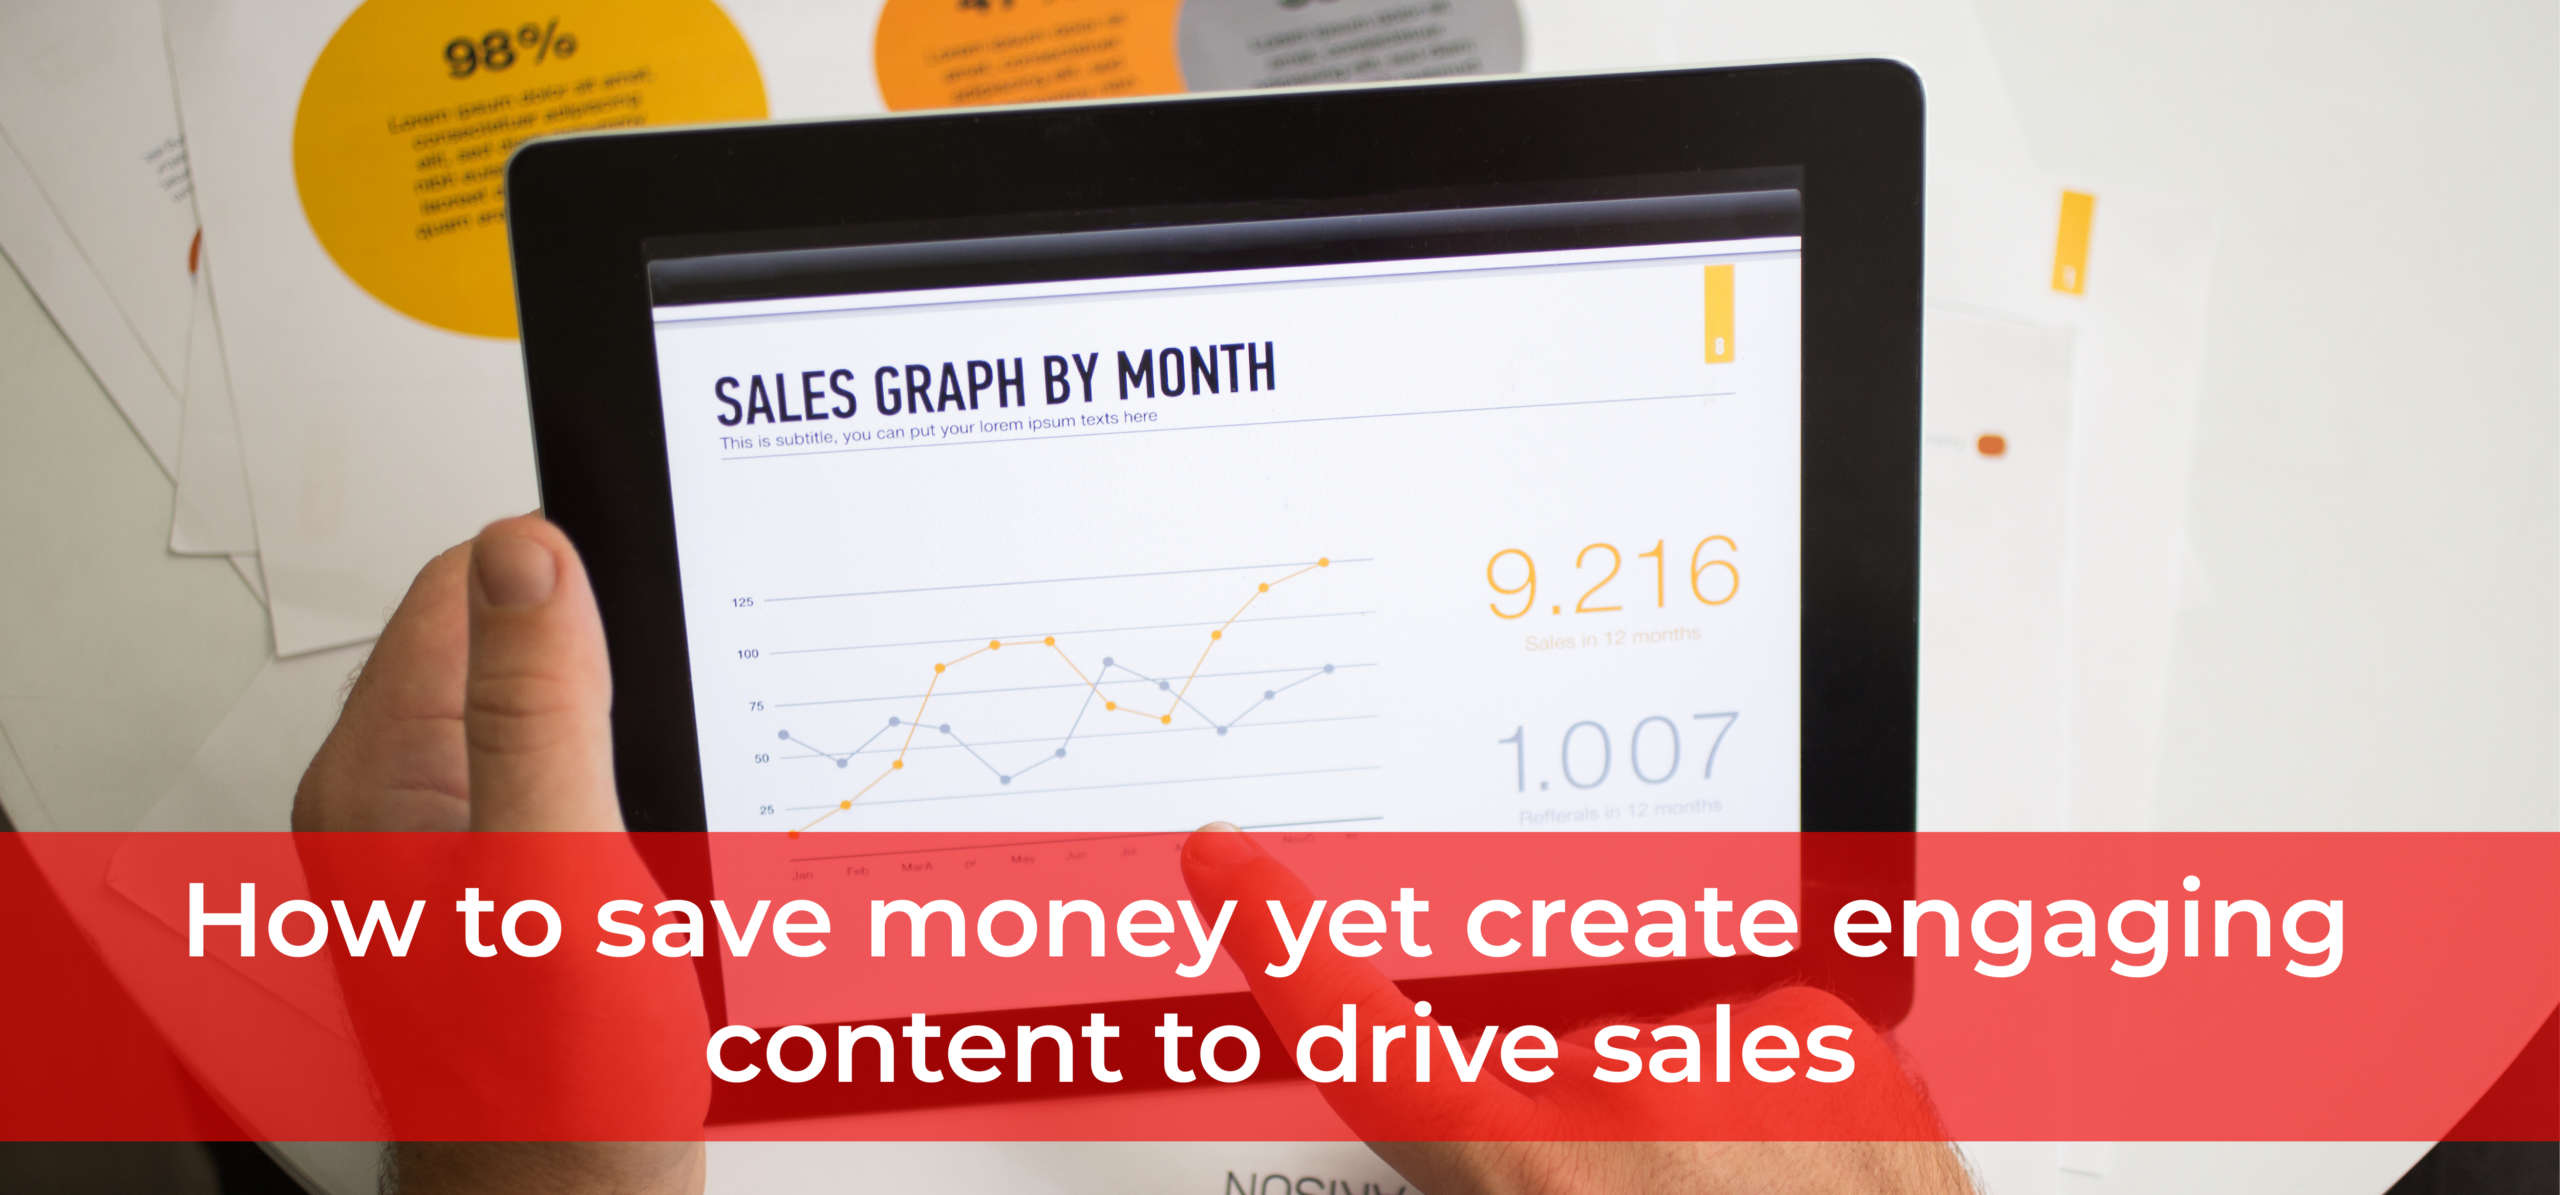 How to save money yet create engaging content to drive sales